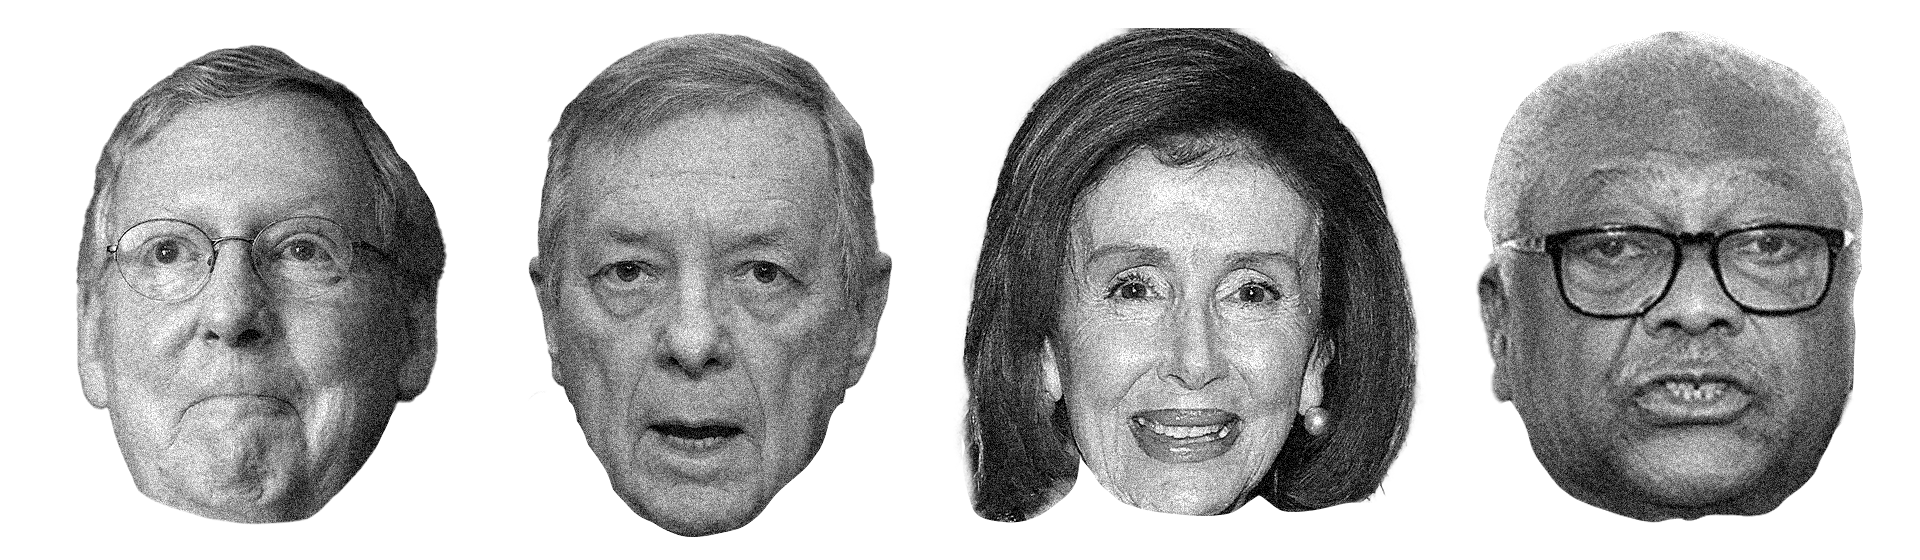 The faces of Mitch McConnell, Dick Durbin, Dianne Feinstein, and Nancy Pelosi, in black-and-white and side by side.